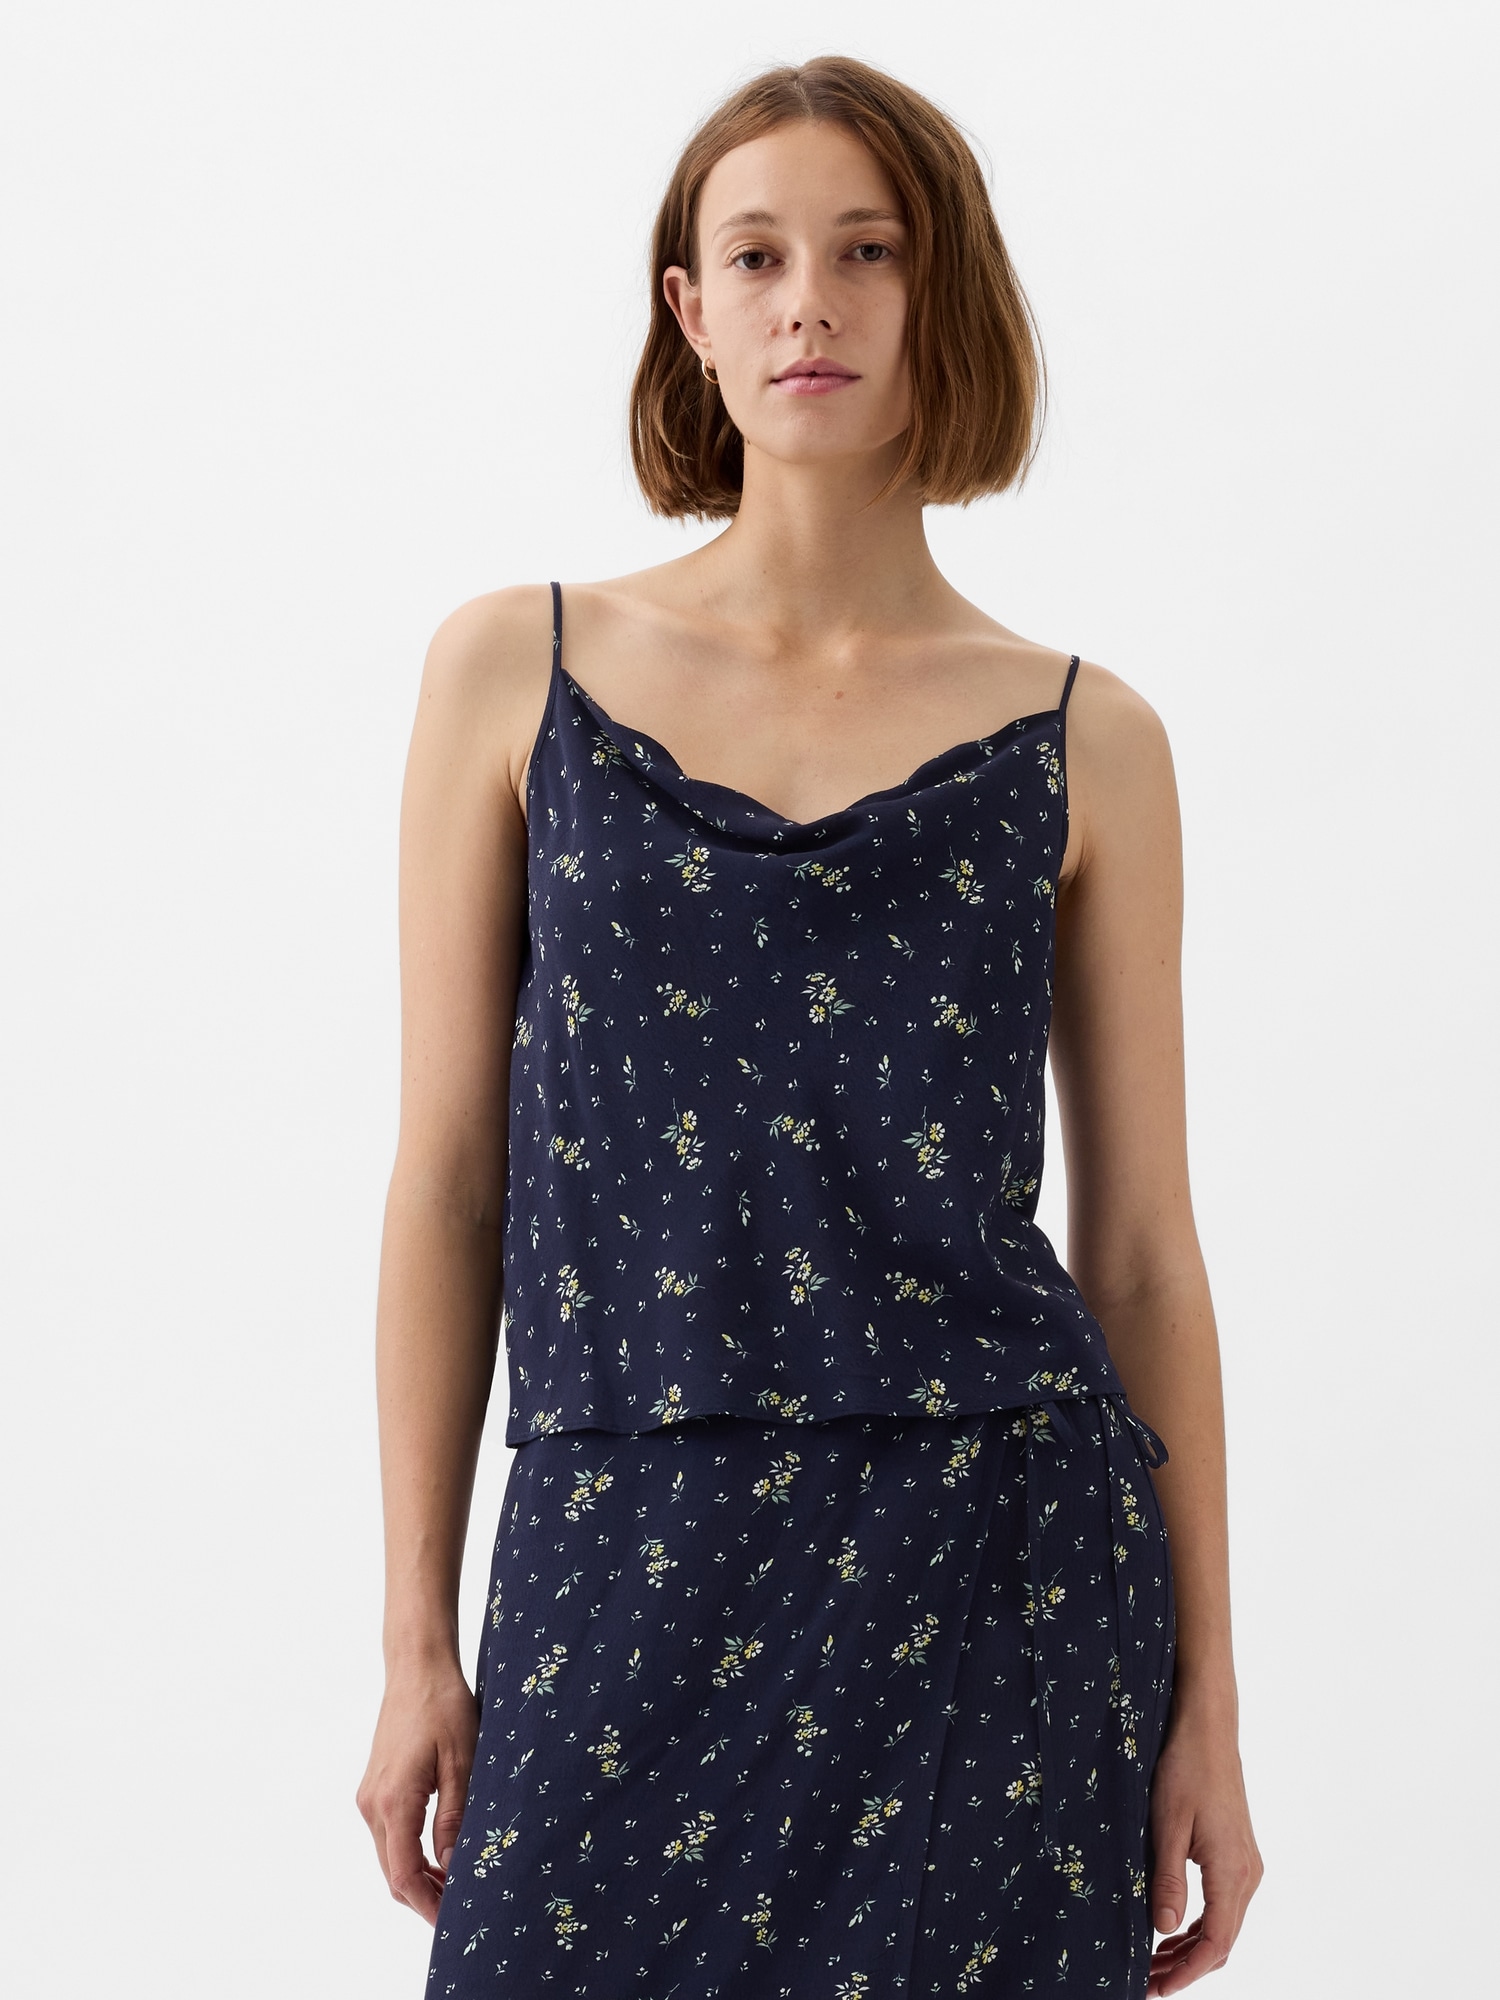 Buy Banana Republic Loire Square-Neck Camisole from the Gap online